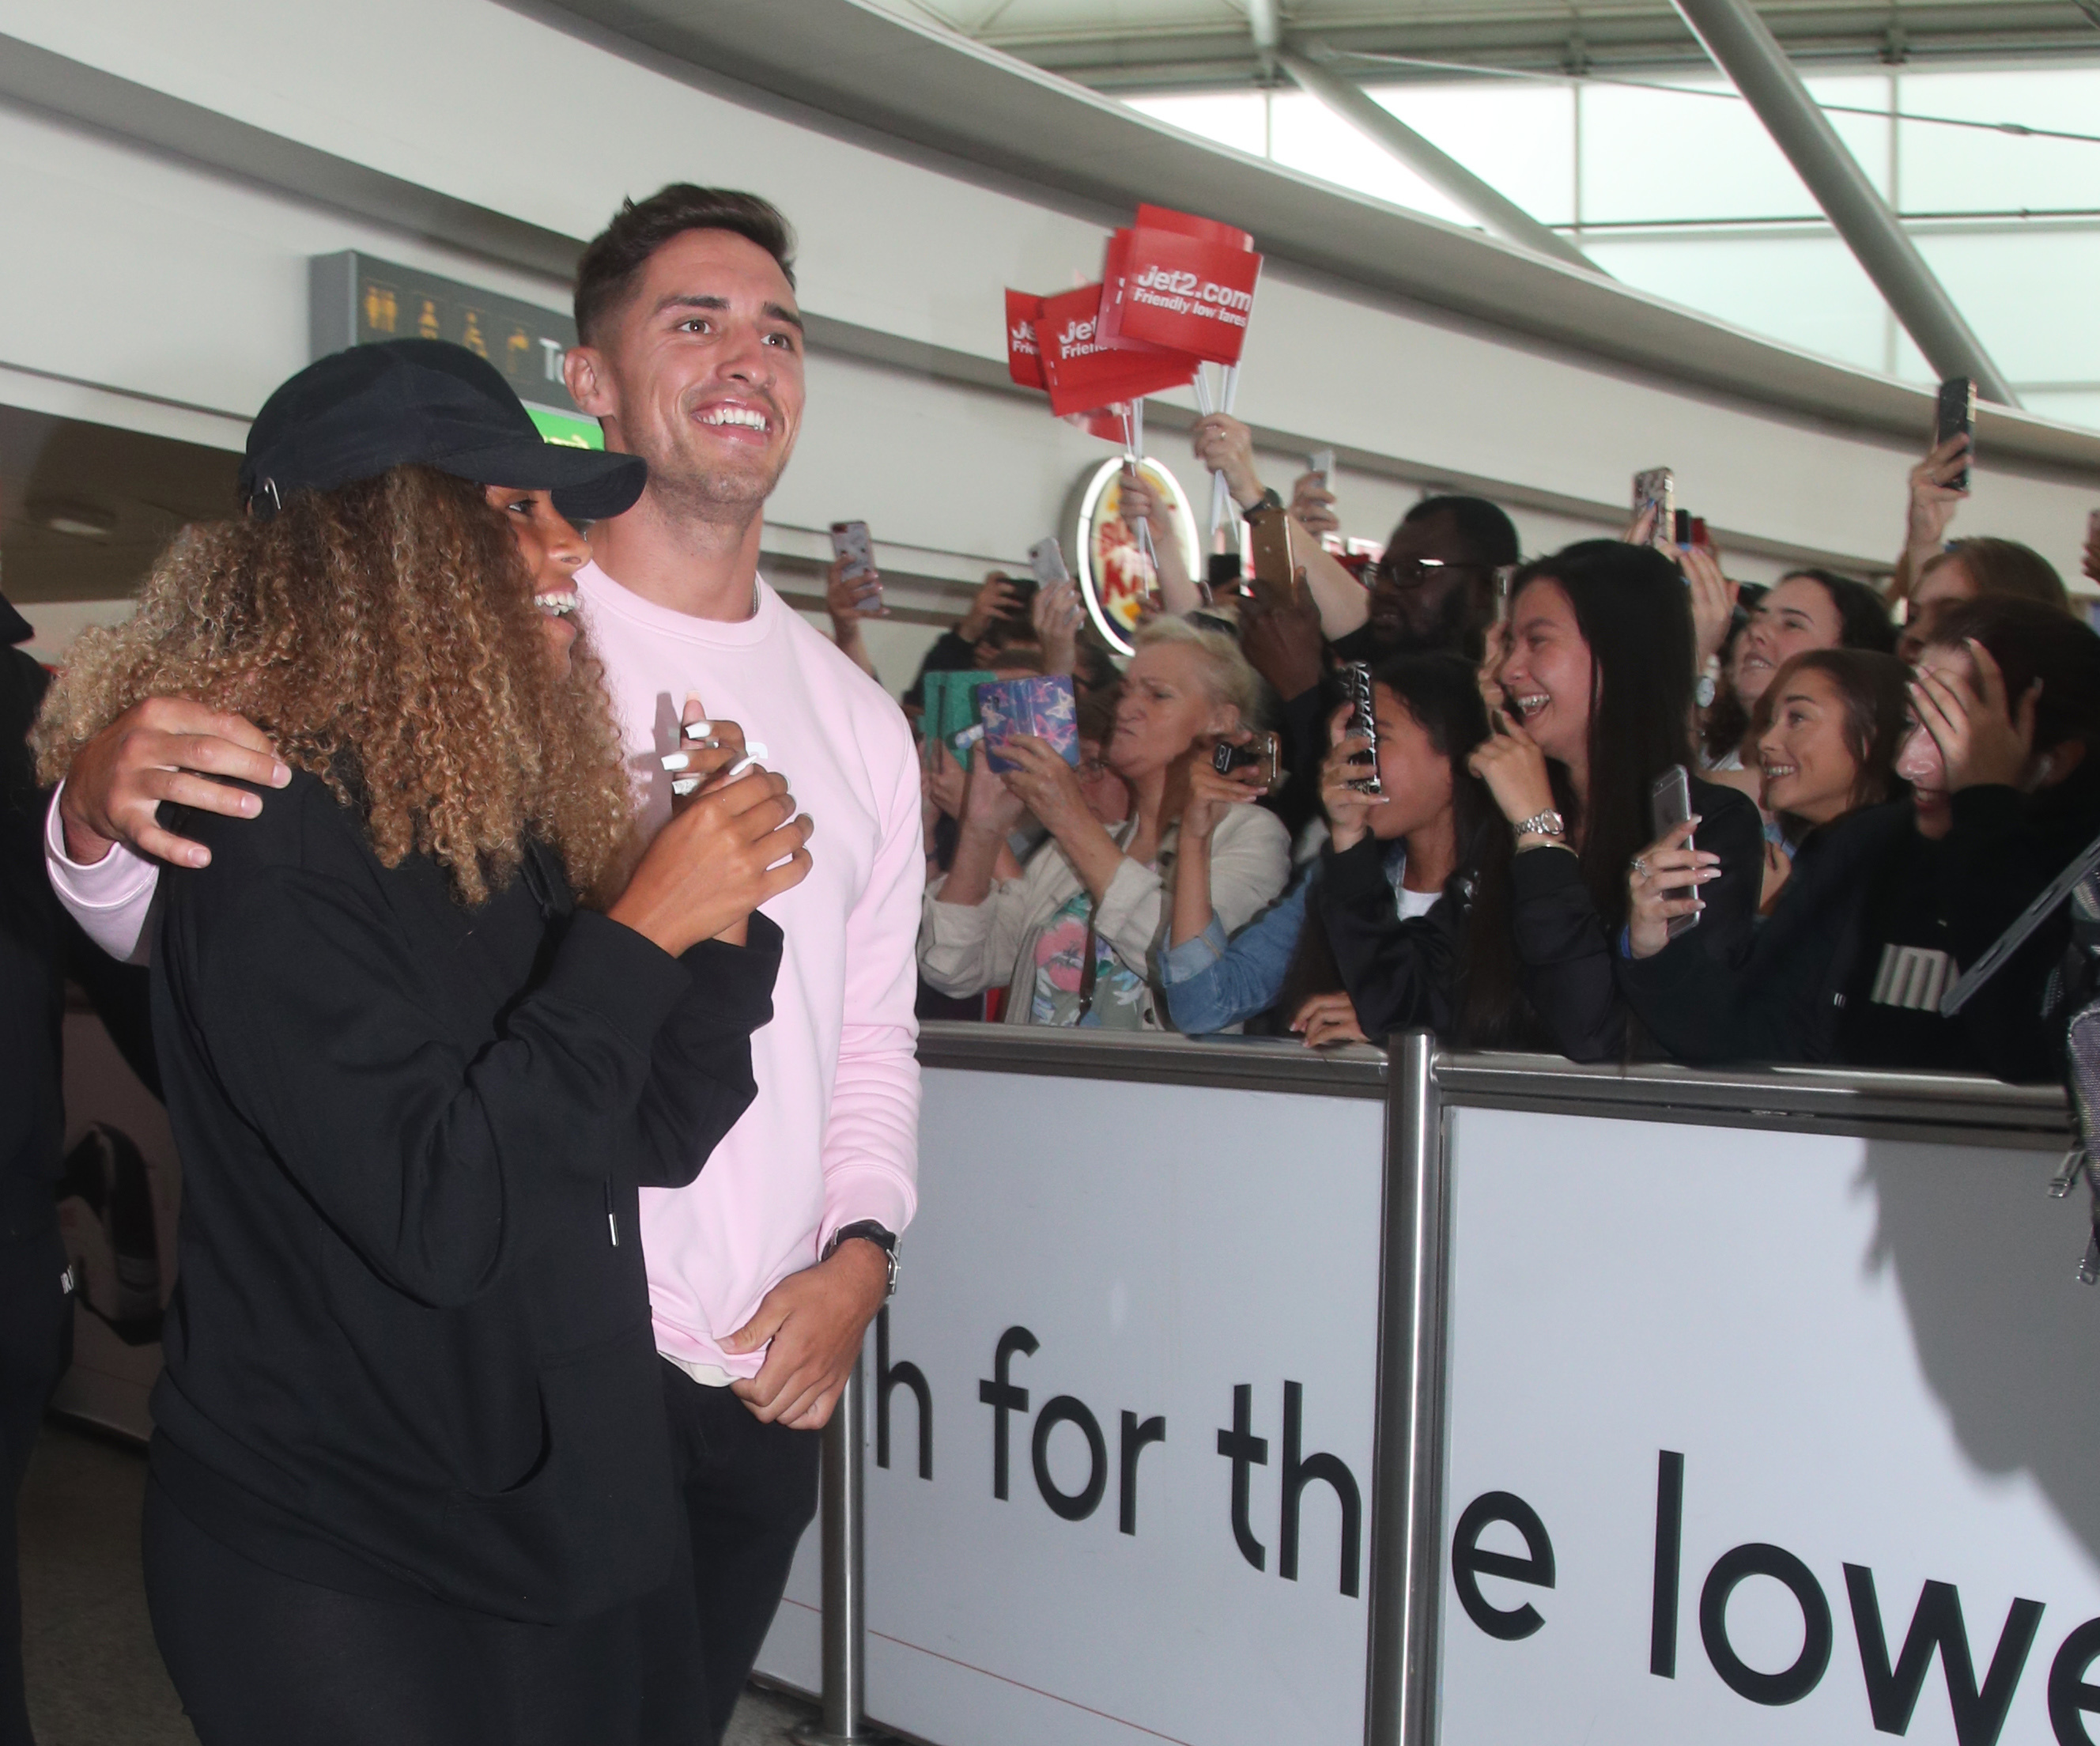 Love Island winners Amber Gill and Greg O'Shea greet fans as they arrive at Stansted Airport in Essex following the final of the reality TV show.